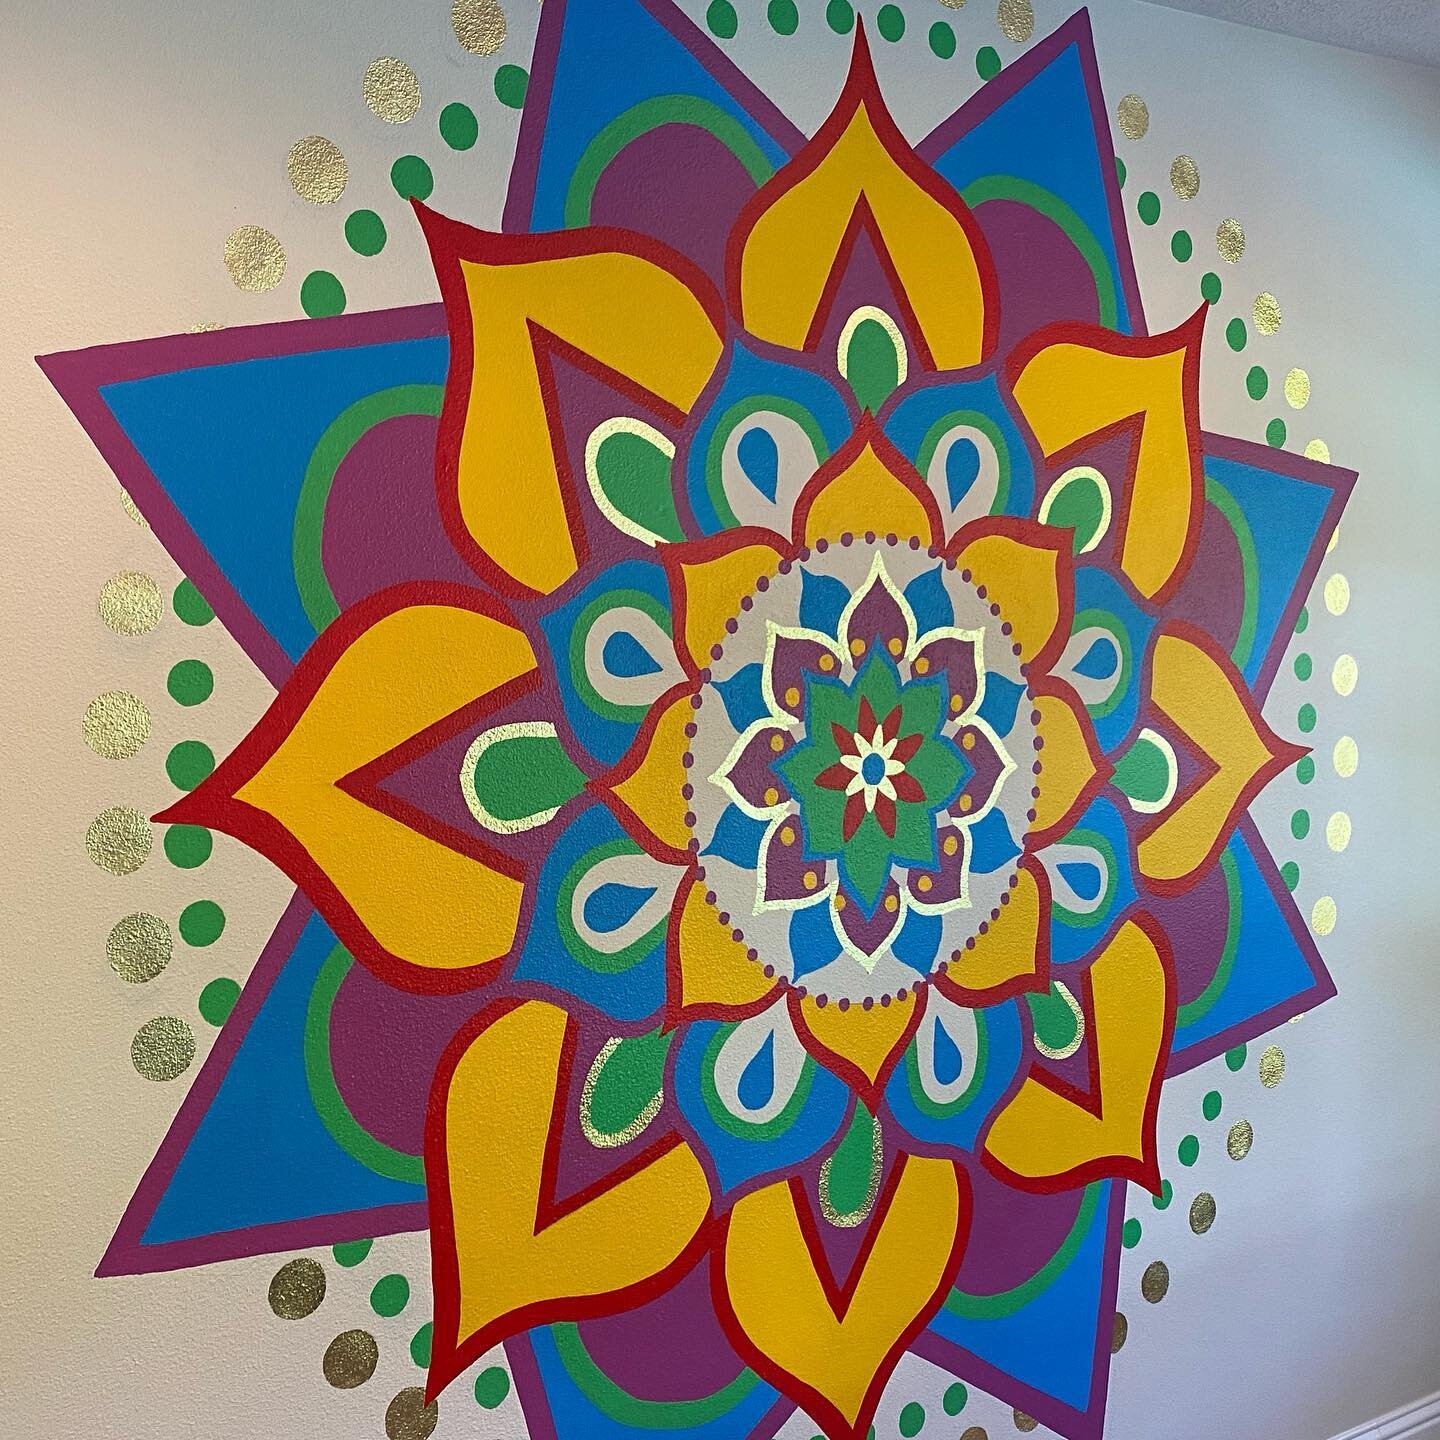 Finished this fun mandala design and peacock pattern, and added some gold leaf for extra interest. #mandala #mural #liampaintswalls #oregonpainters #portlandartist